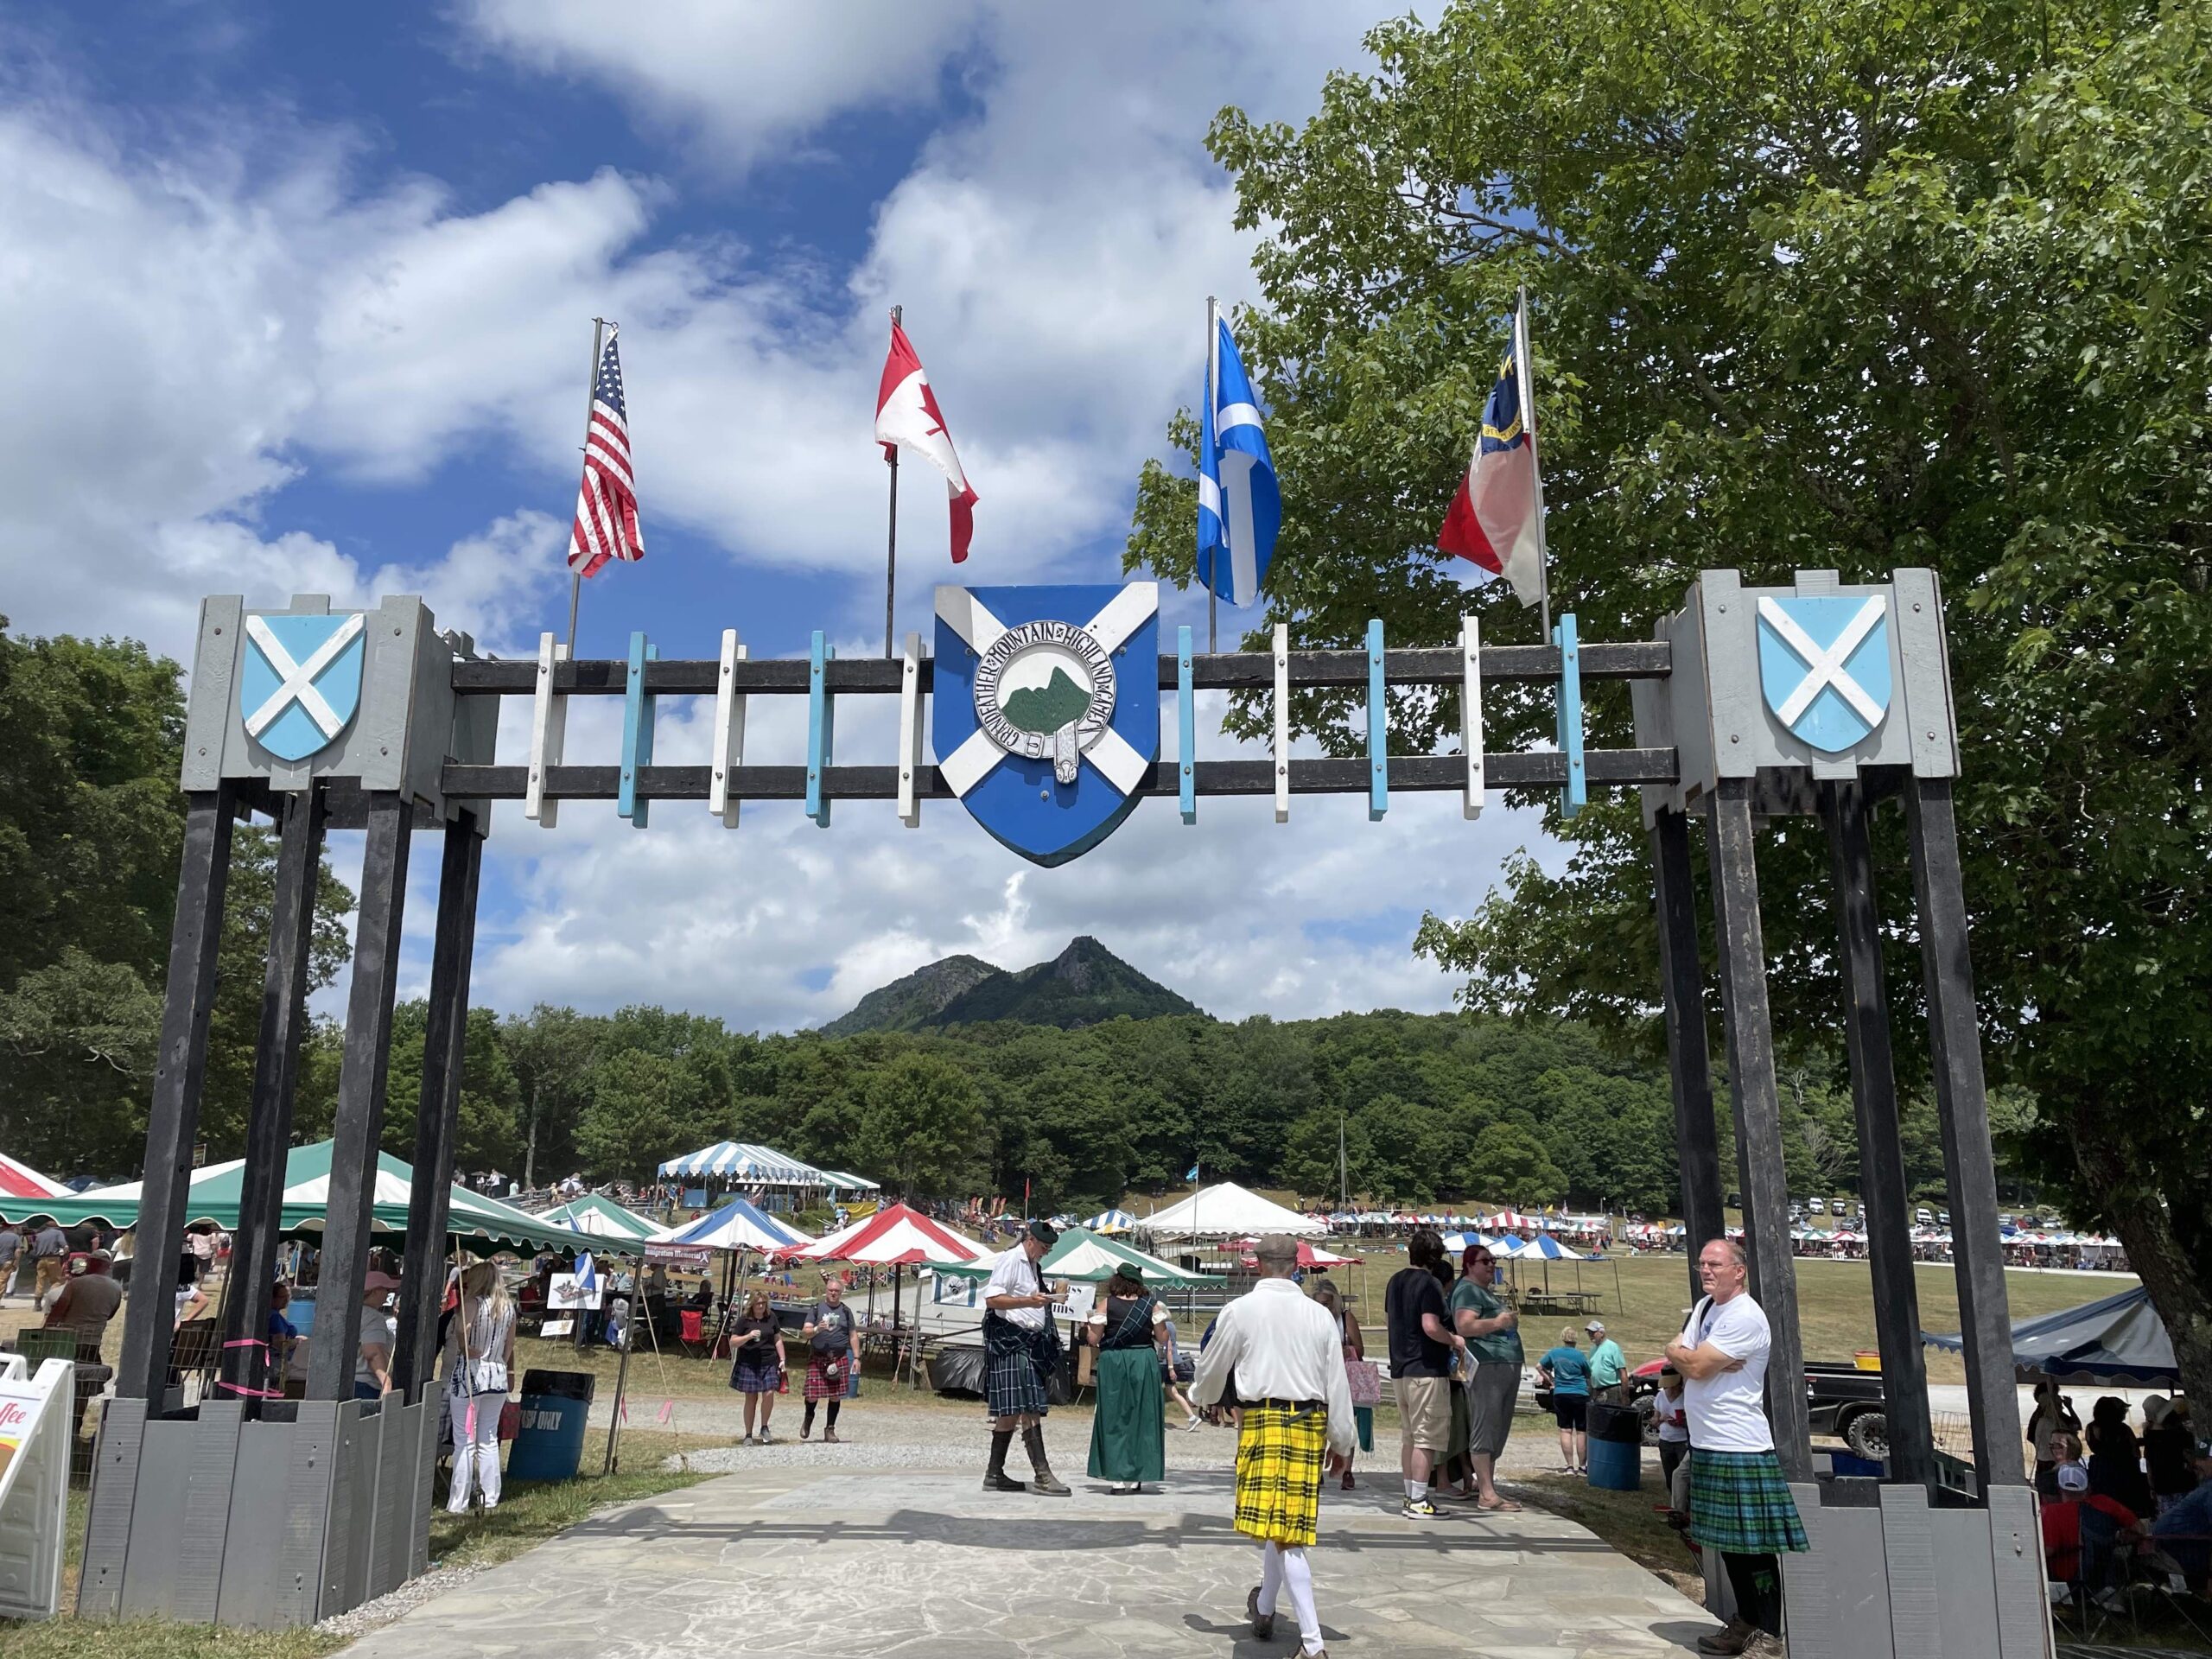 The entrance gate at Grandfather Mountain Highland Games